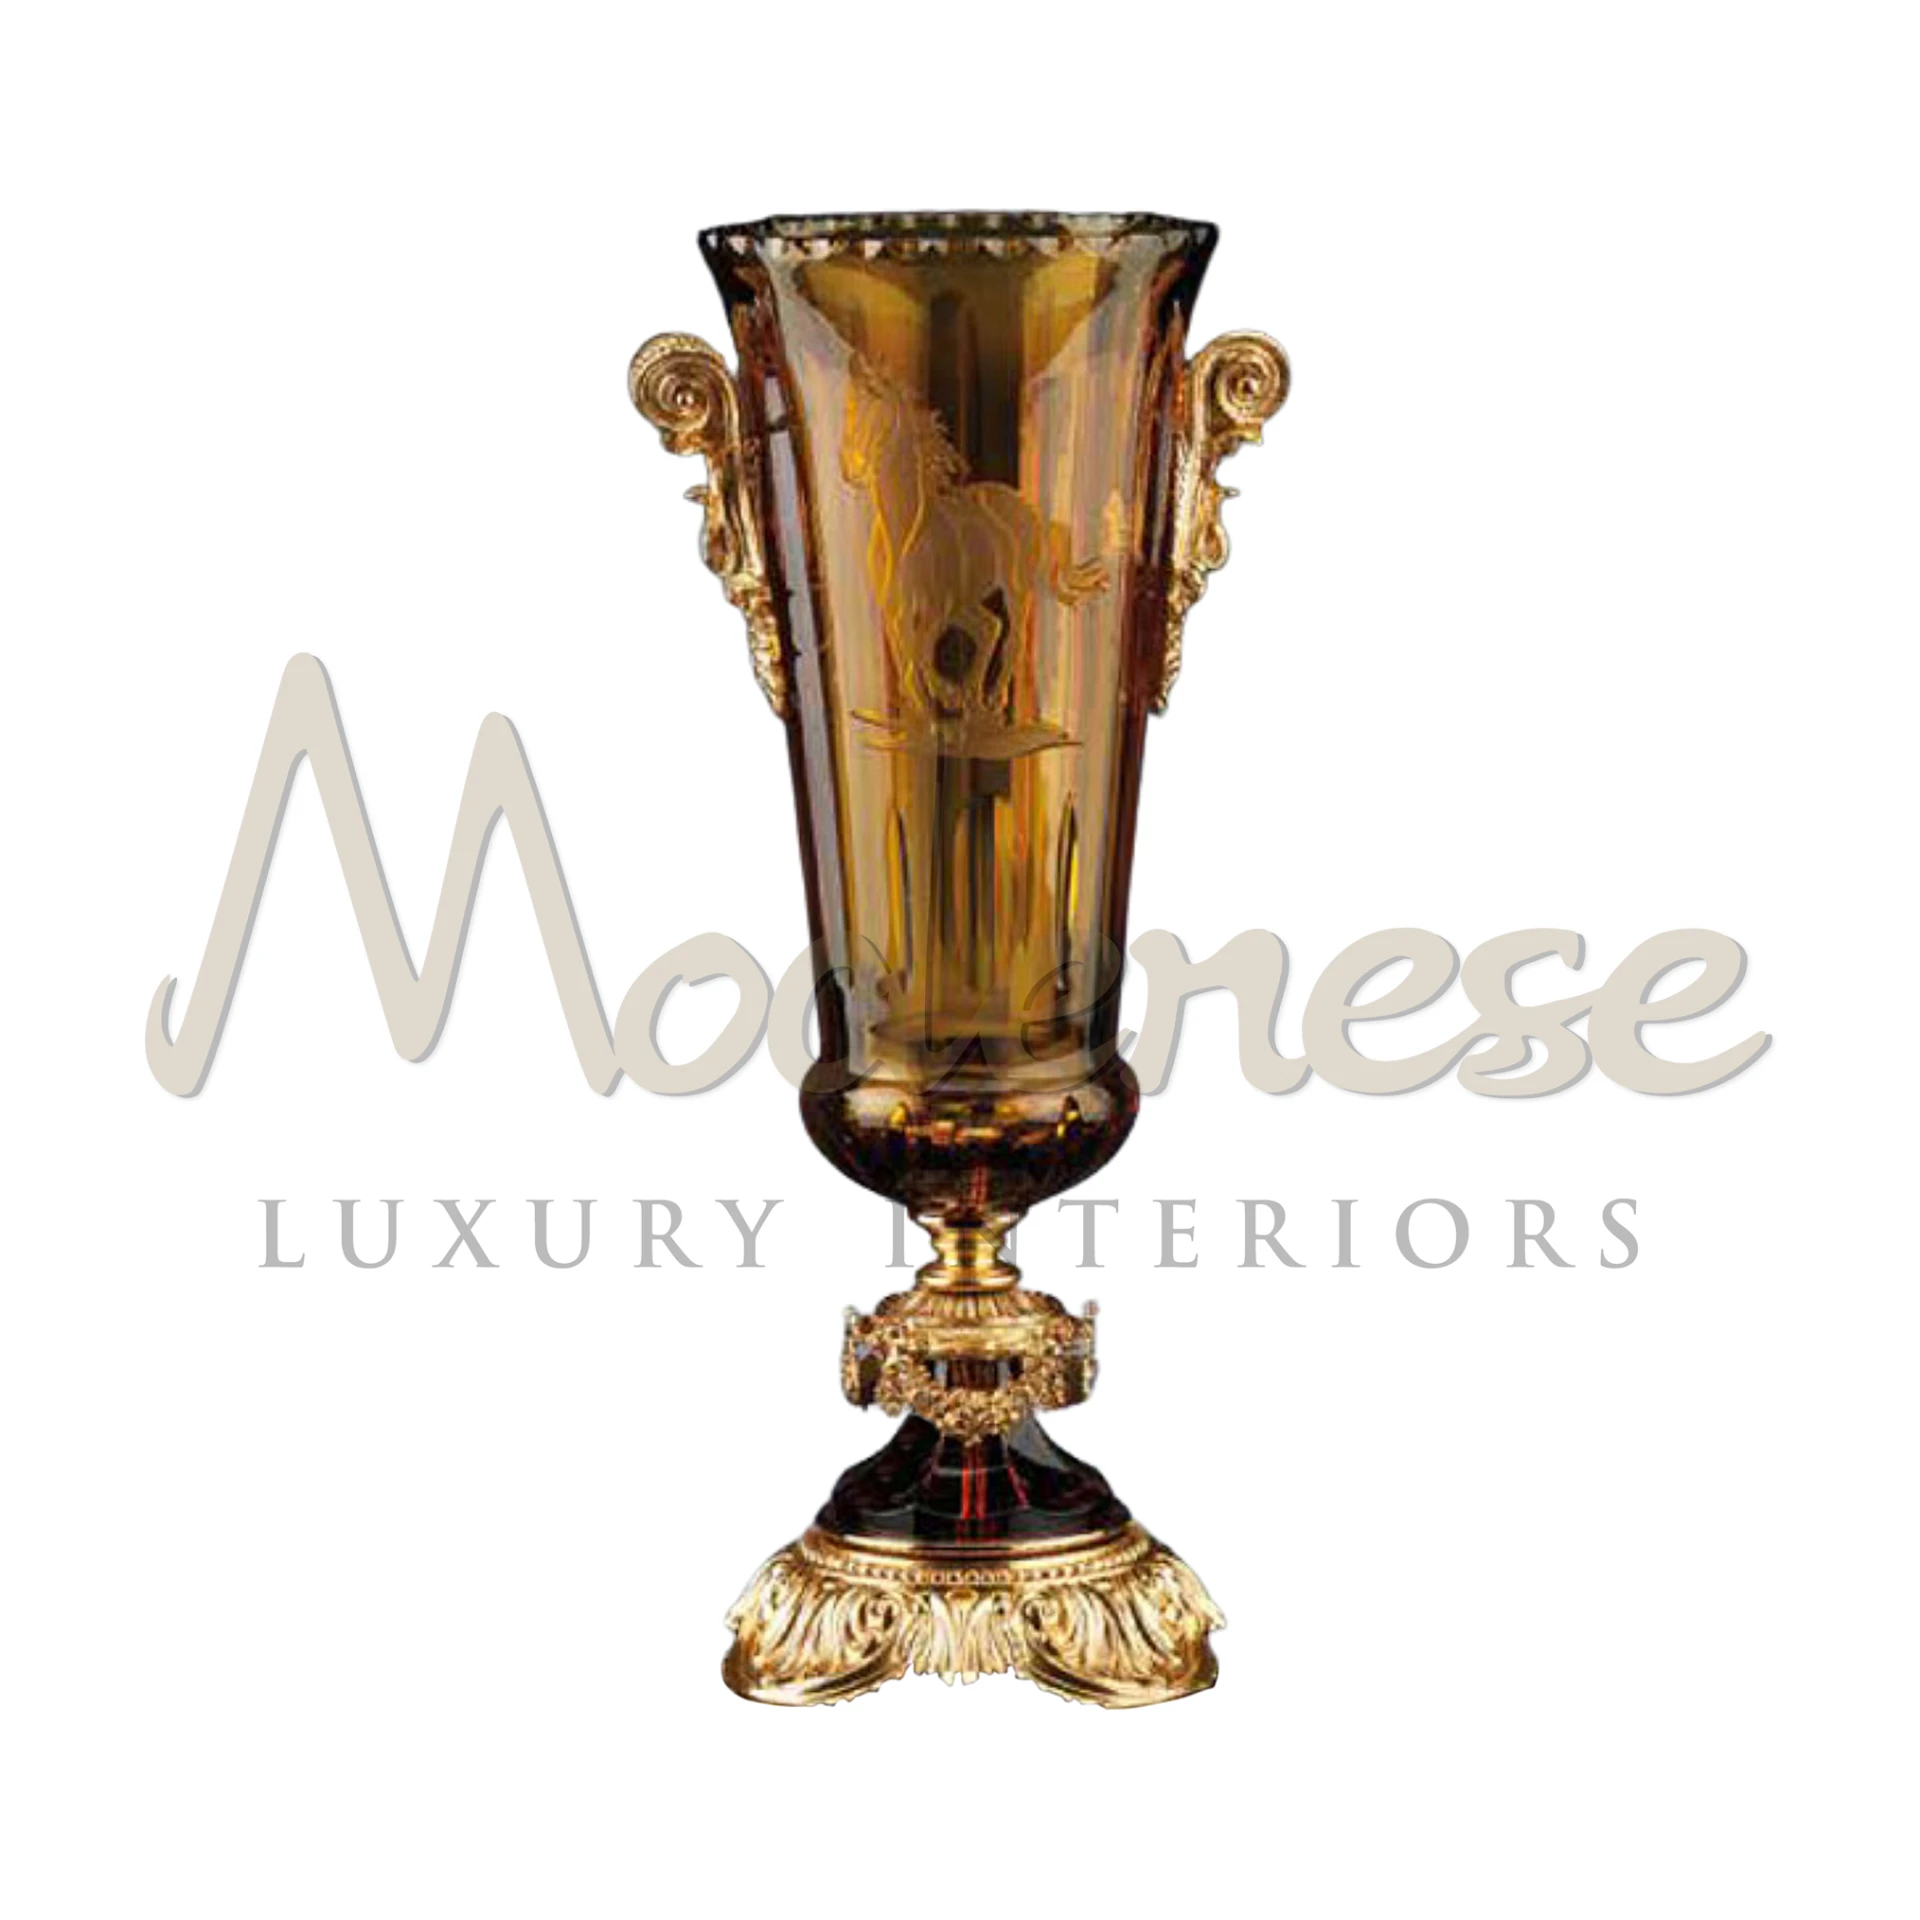 Elegant classical tall glass vase, ideal for sophisticated home decor and events, enhances luxury and classic interior spaces.







